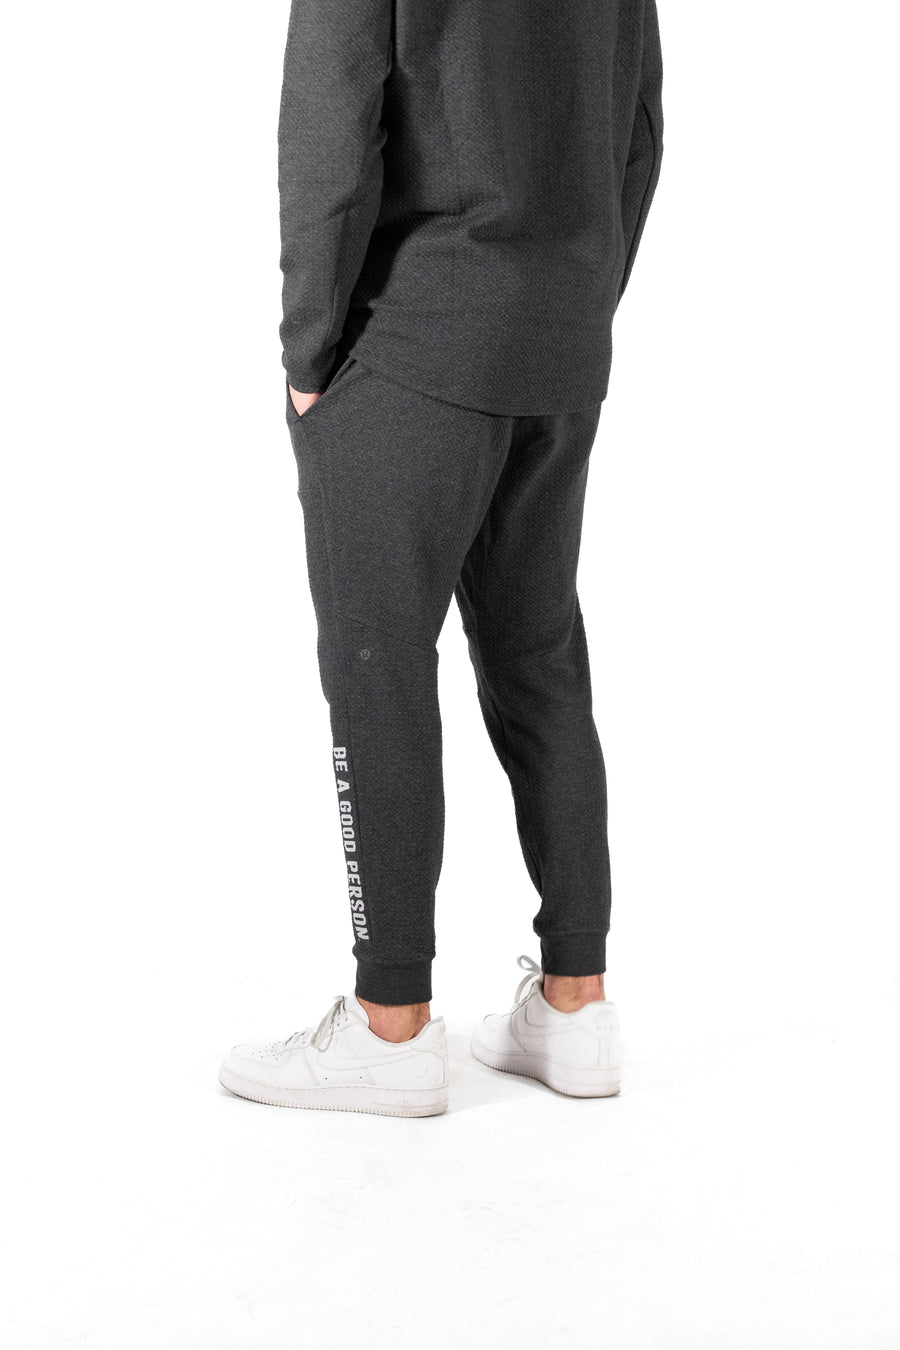 At Ease Textured Double Knit Jogger - Heathered Black/Black - lululemon // BE A GOOD PERSON